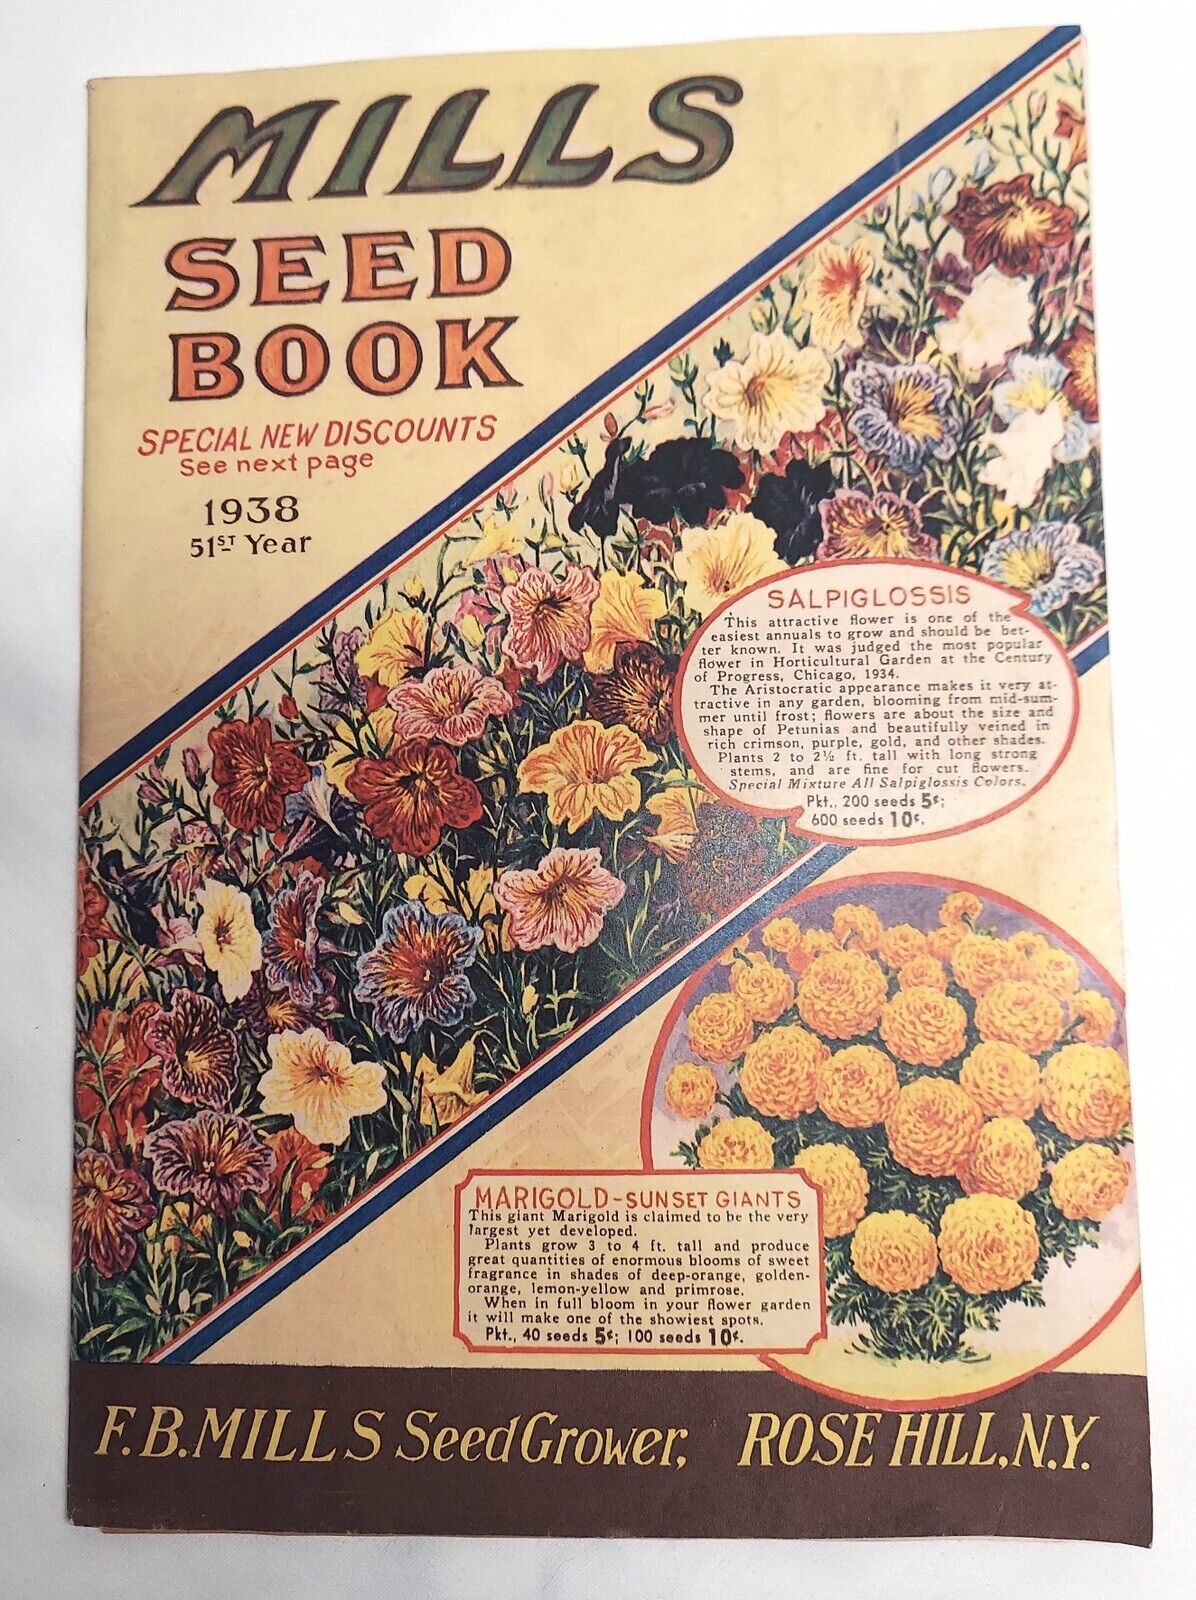 Mills Seed Book 1938 51st Year Vintage Rose Hill NY Beautifully Illustrated